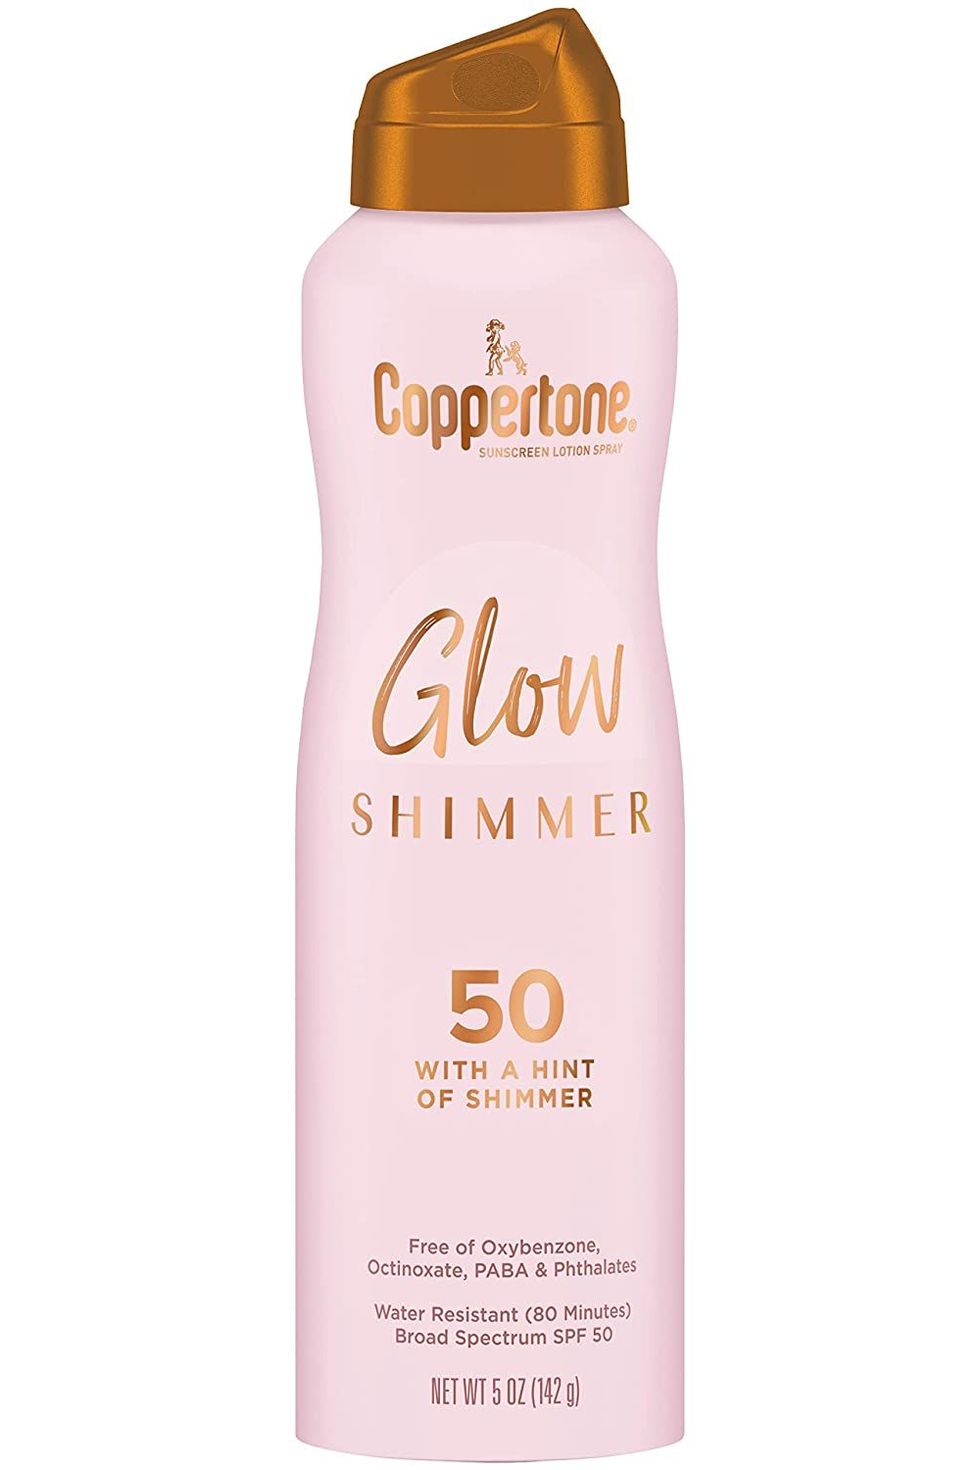 Glow with Shimmer Sunscreen Spray SPF 50